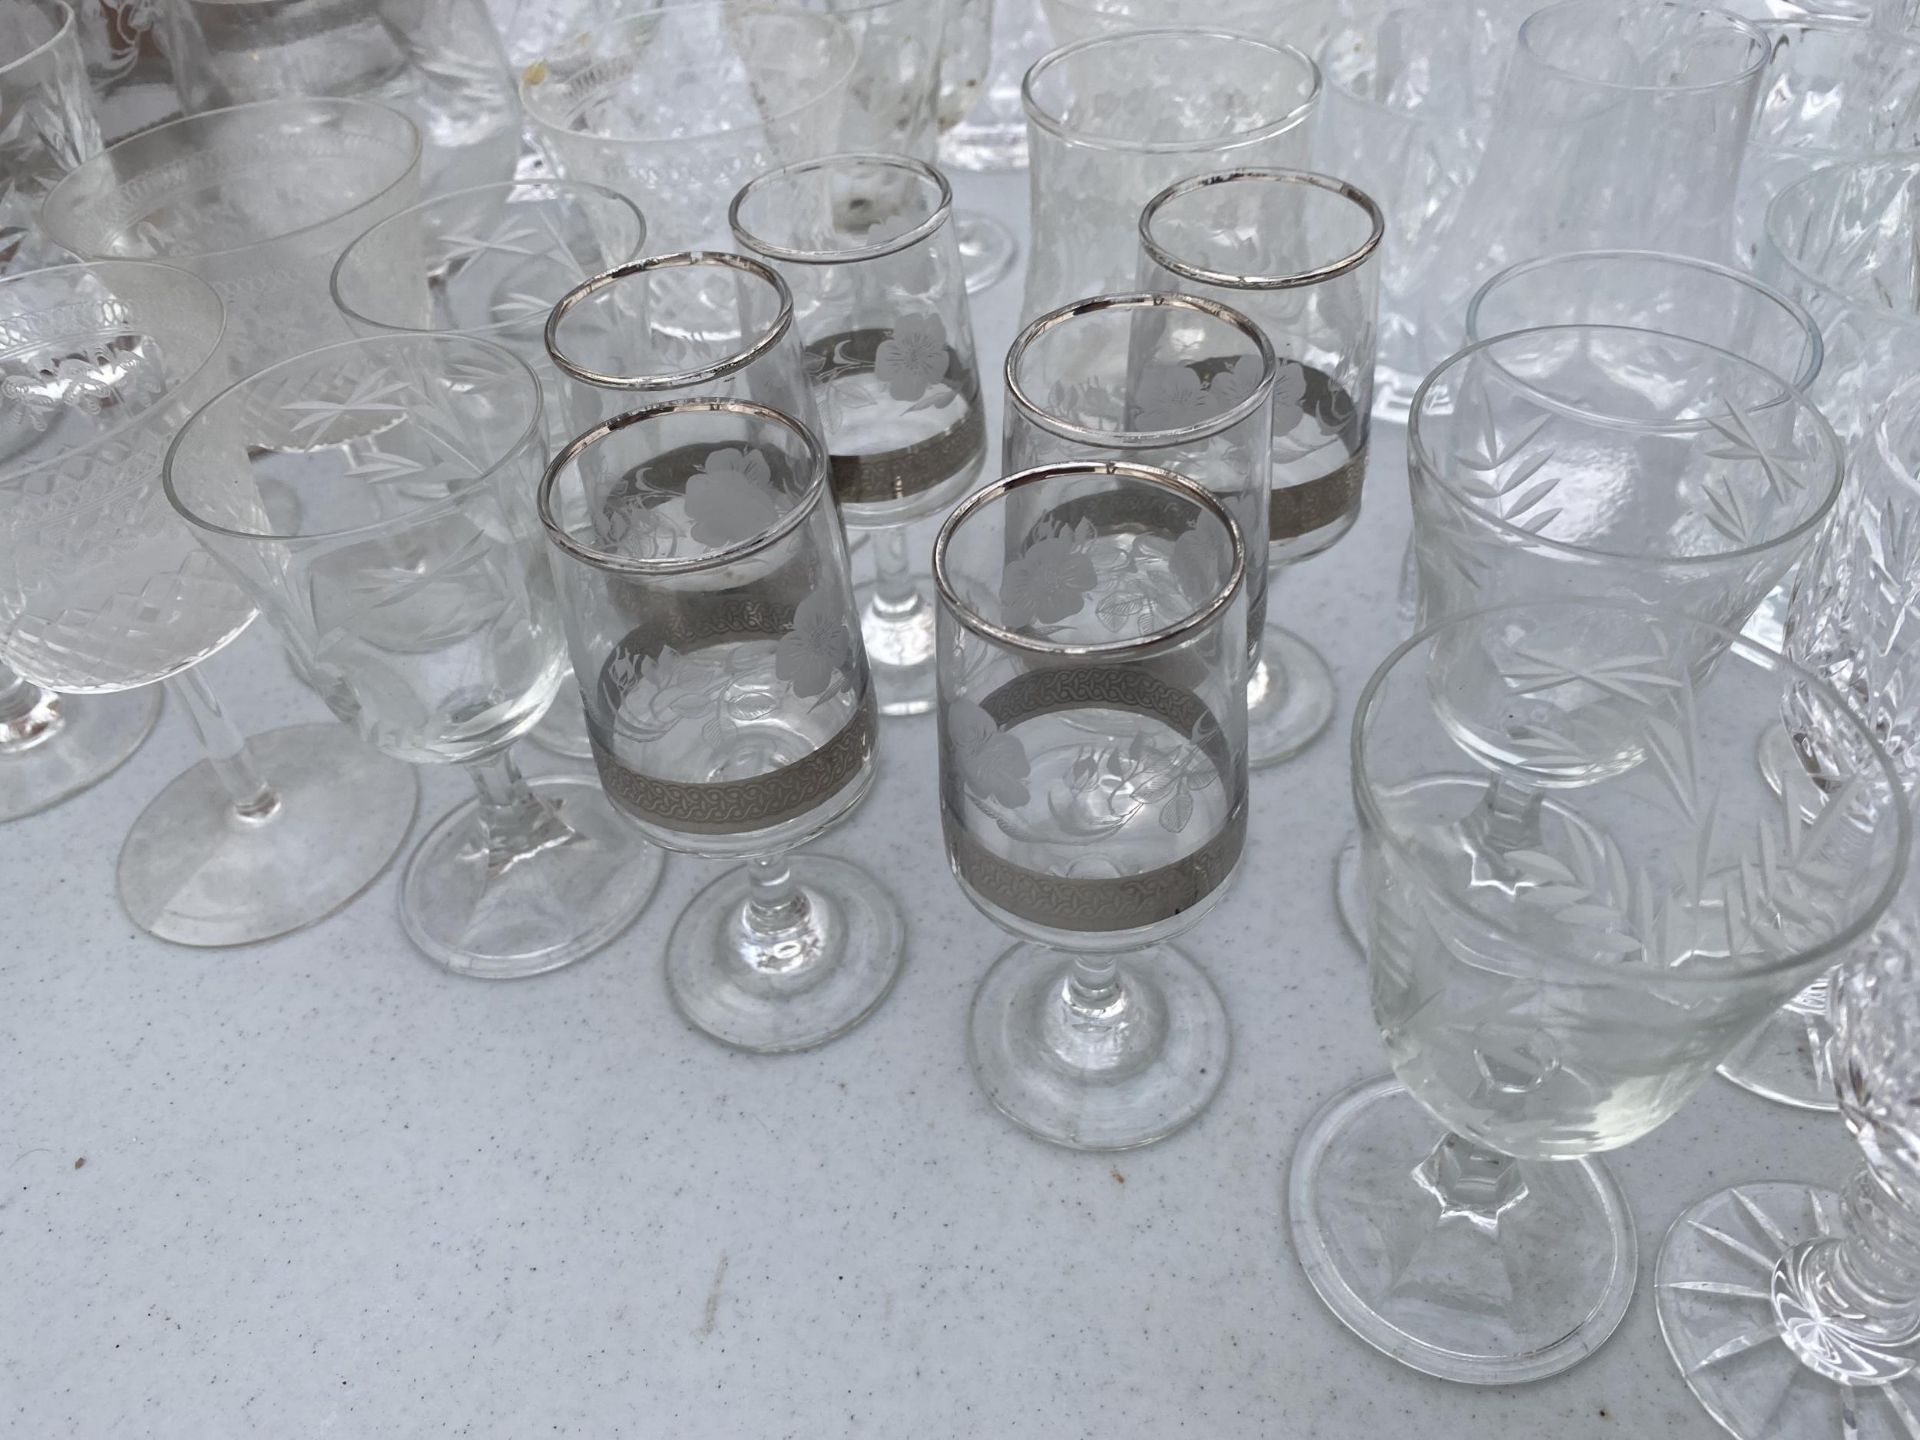 AN ASSORTMENT OF GLASS WARE TO INCLUDE EDINBURGH CRYSTAL TUMBLERS, SHERRY GLASSES AND WINE GLASSES - Image 2 of 6